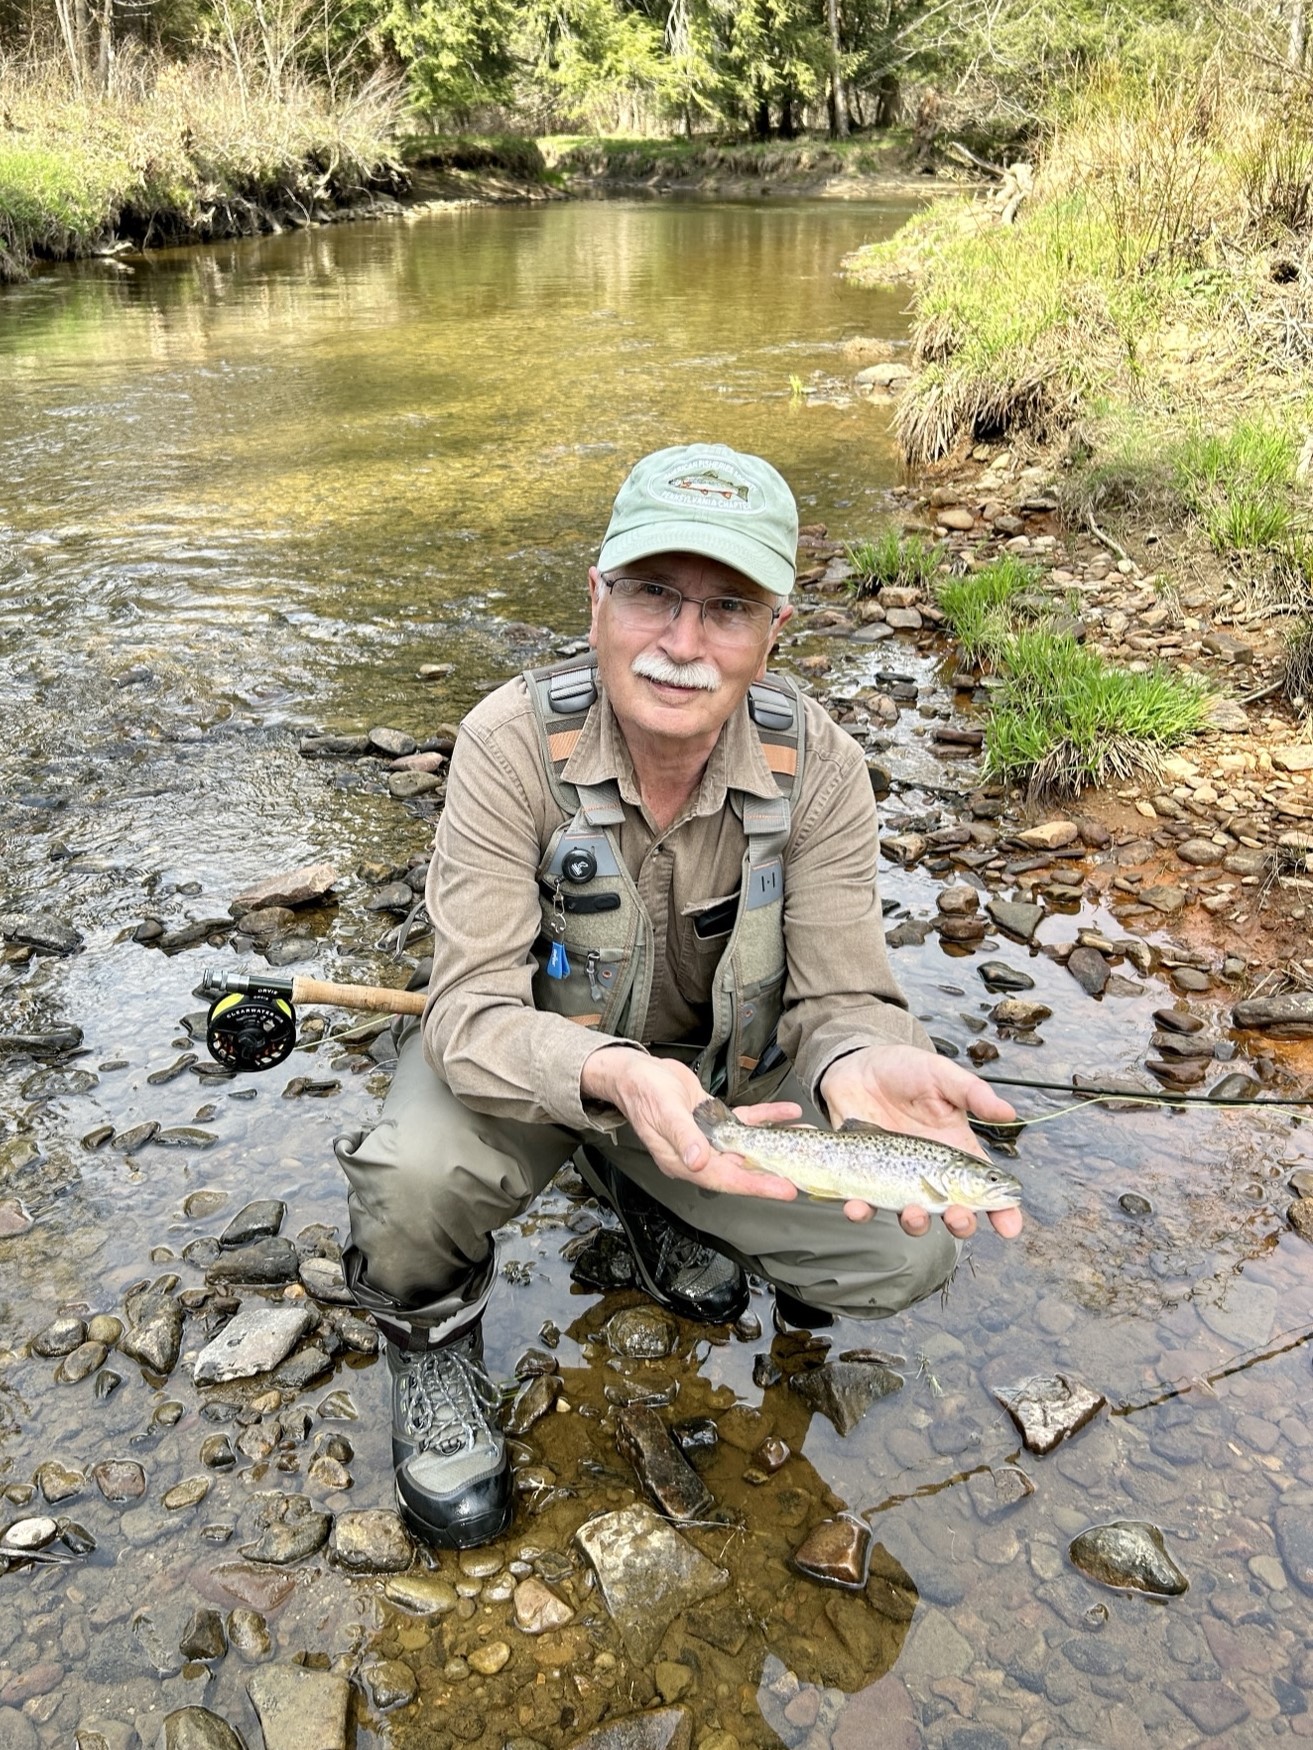 John Tautin on Caldwell, downstream of restoration area between Selkirk and Dotyville Hill rds CROPPED